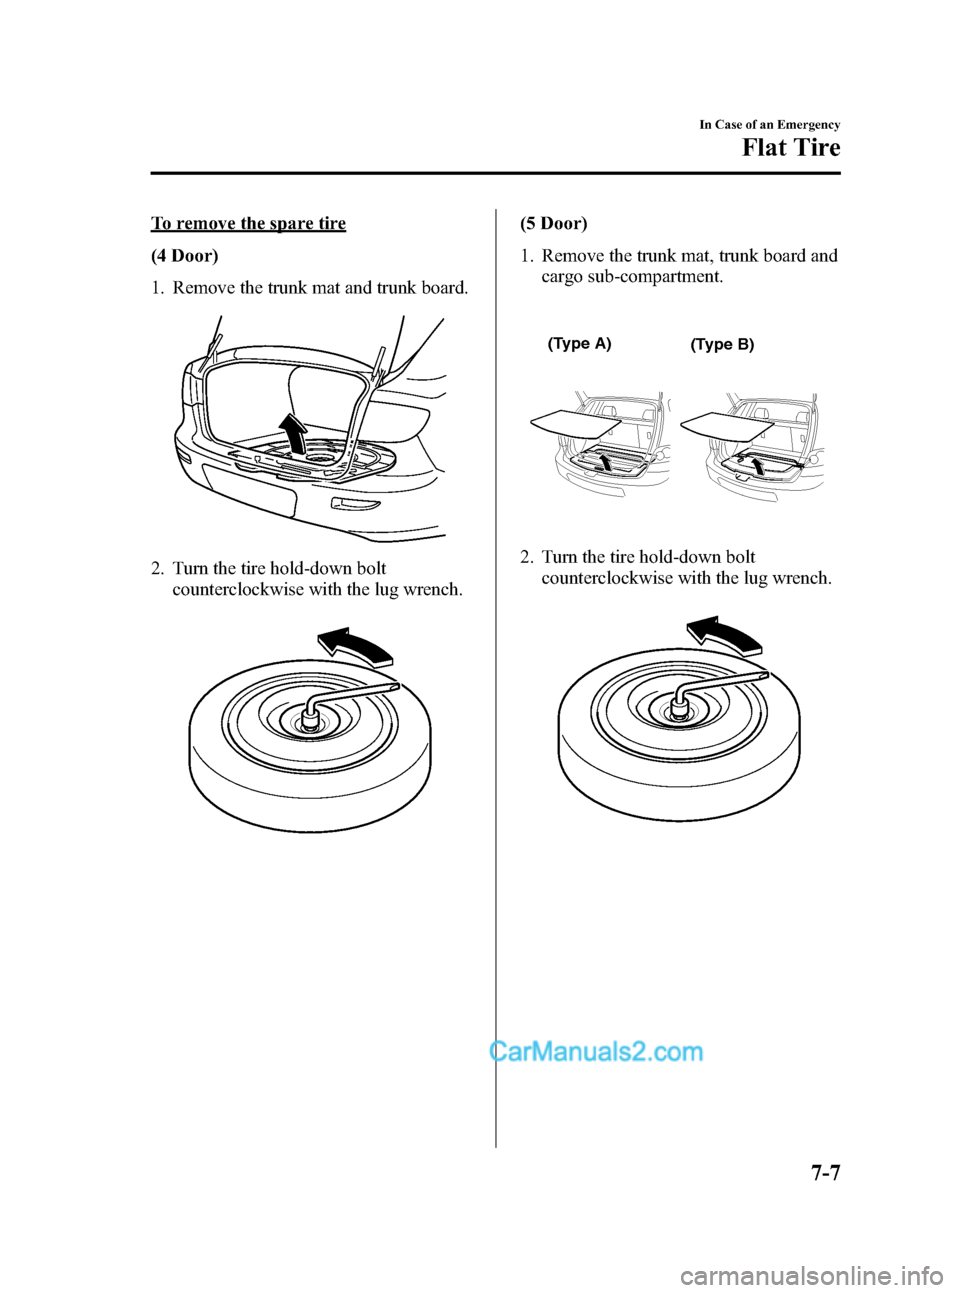 MAZDA MODEL MAZDASPEED 3 2008   (in English) User Guide Black plate (251,1)
To remove the spare tire
(4 Door)
1. Remove the trunk mat and trunk board.
2. Turn the tire hold-down bolt
counterclockwise with the lug wrench.
(5 Door)
1. Remove the trunk mat, t